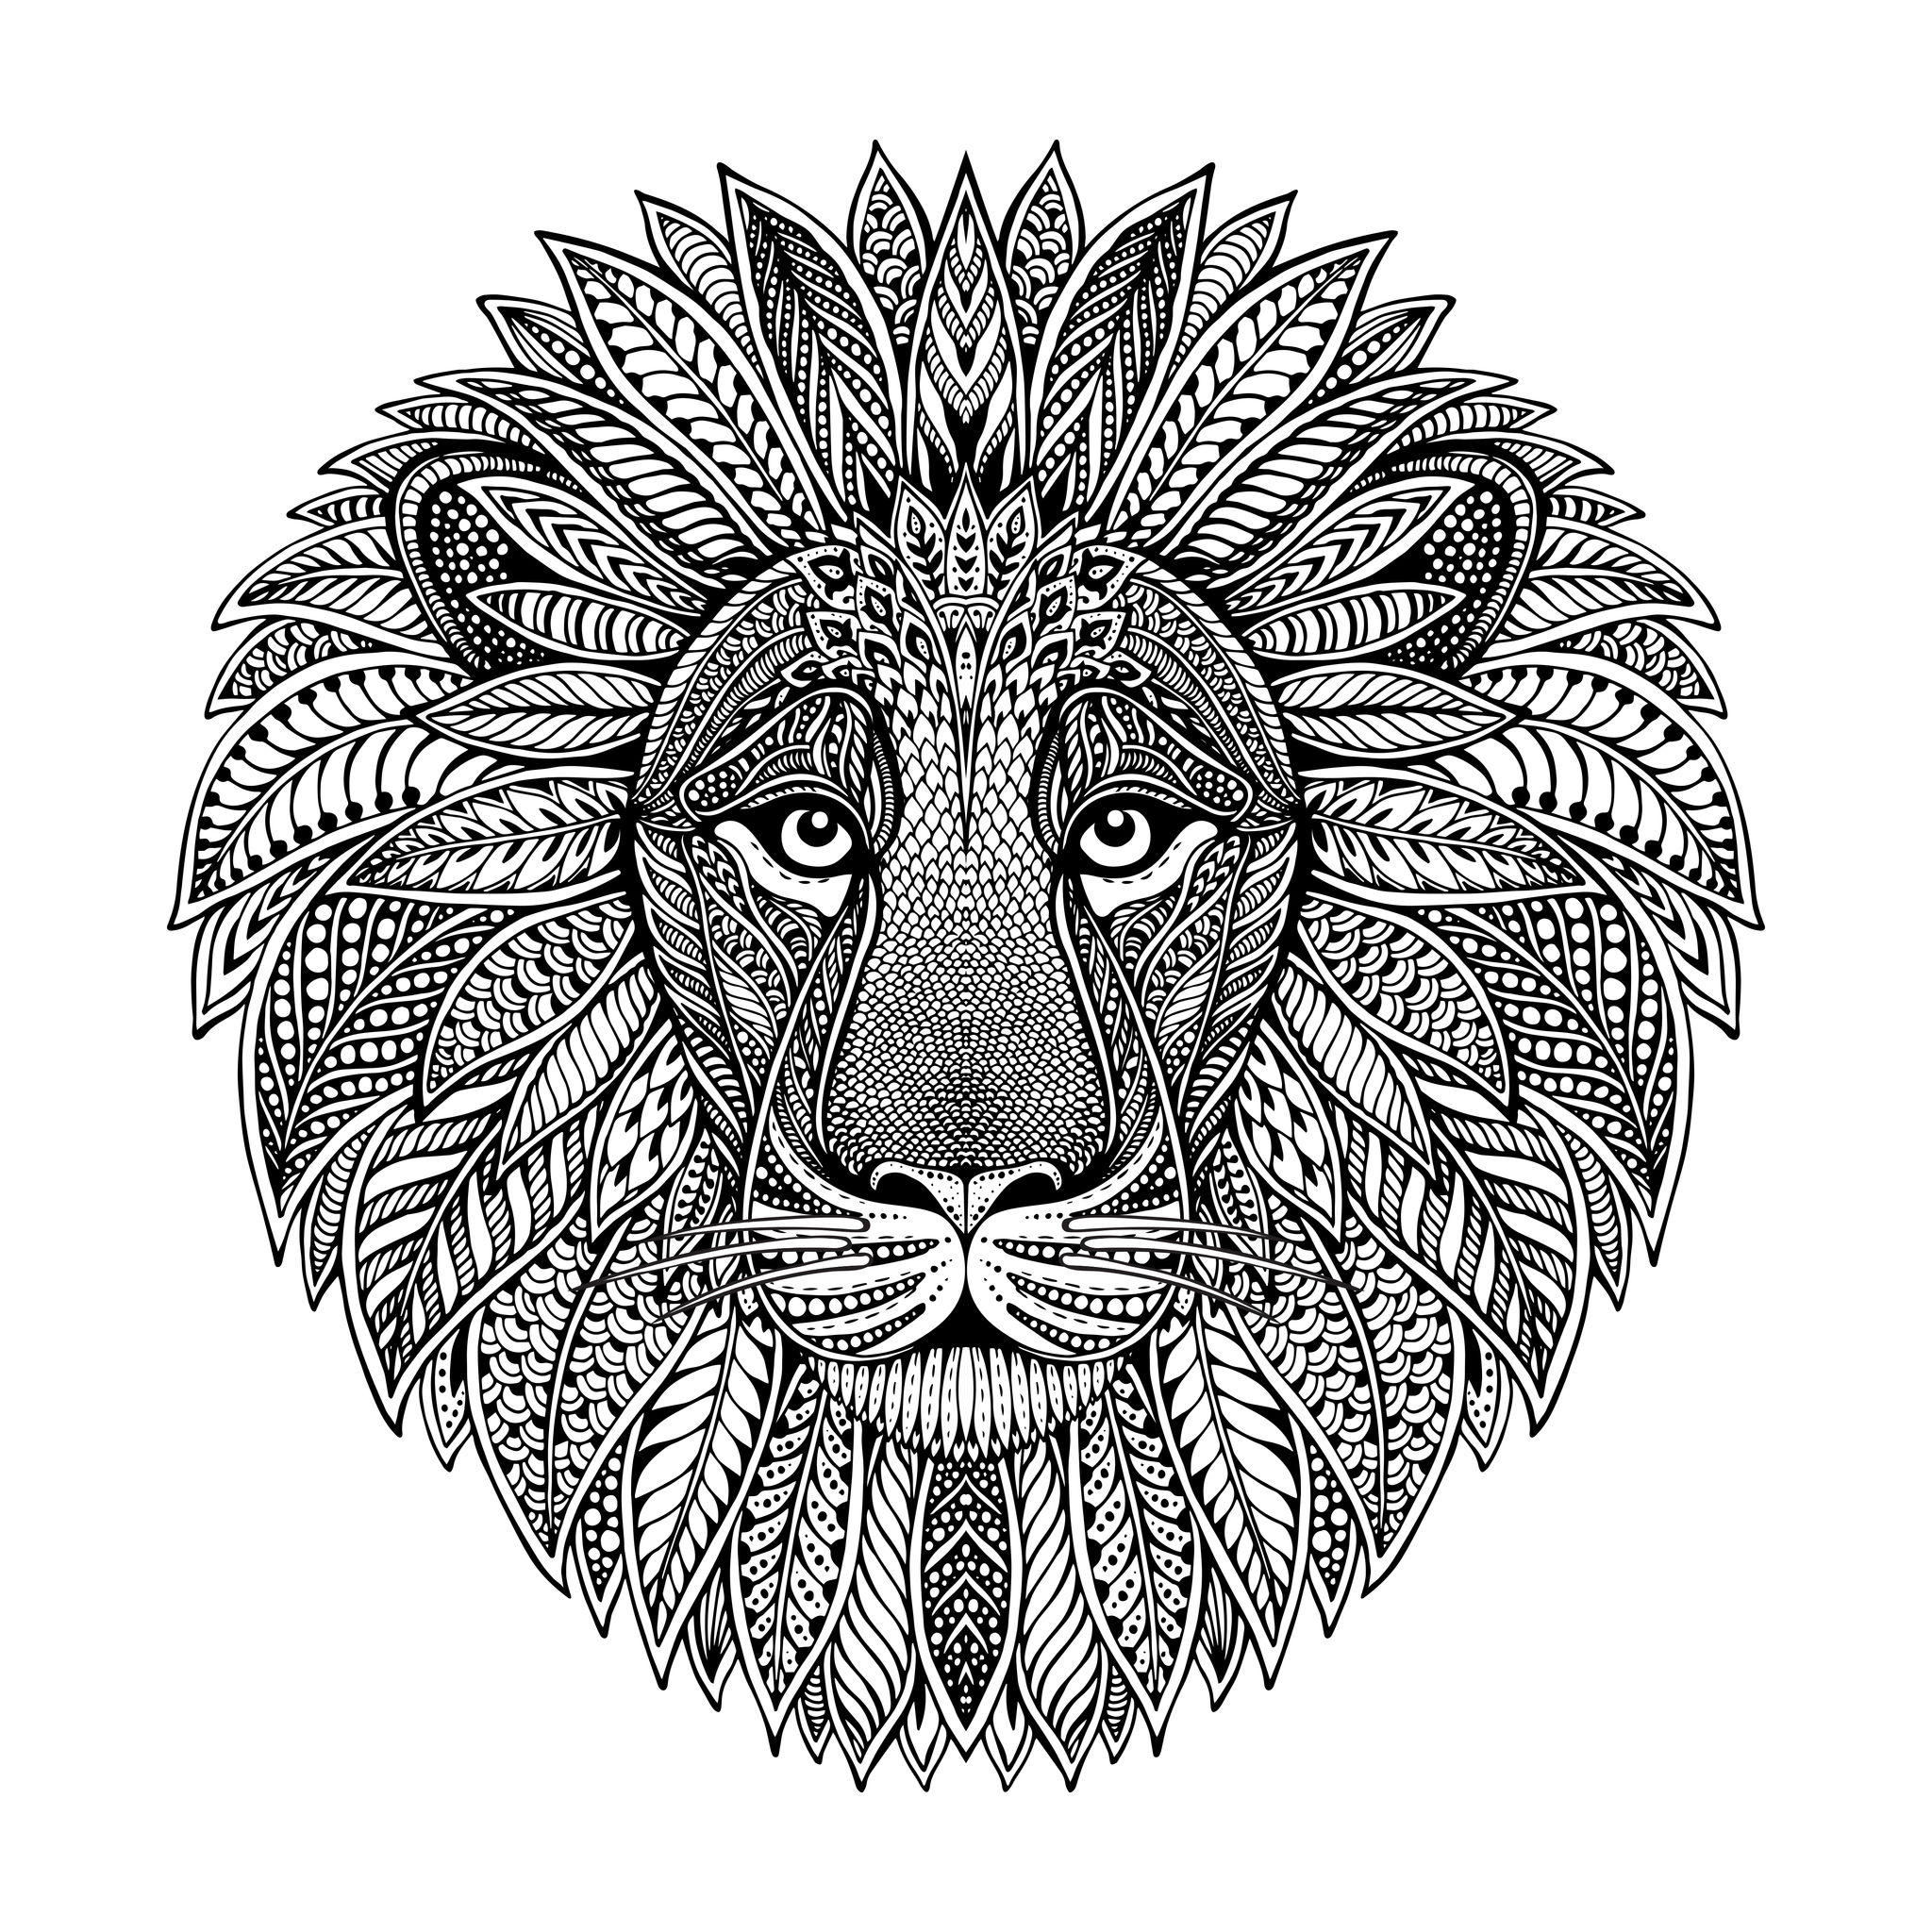 Lion head mandala style - Lions Adult Coloring Pages